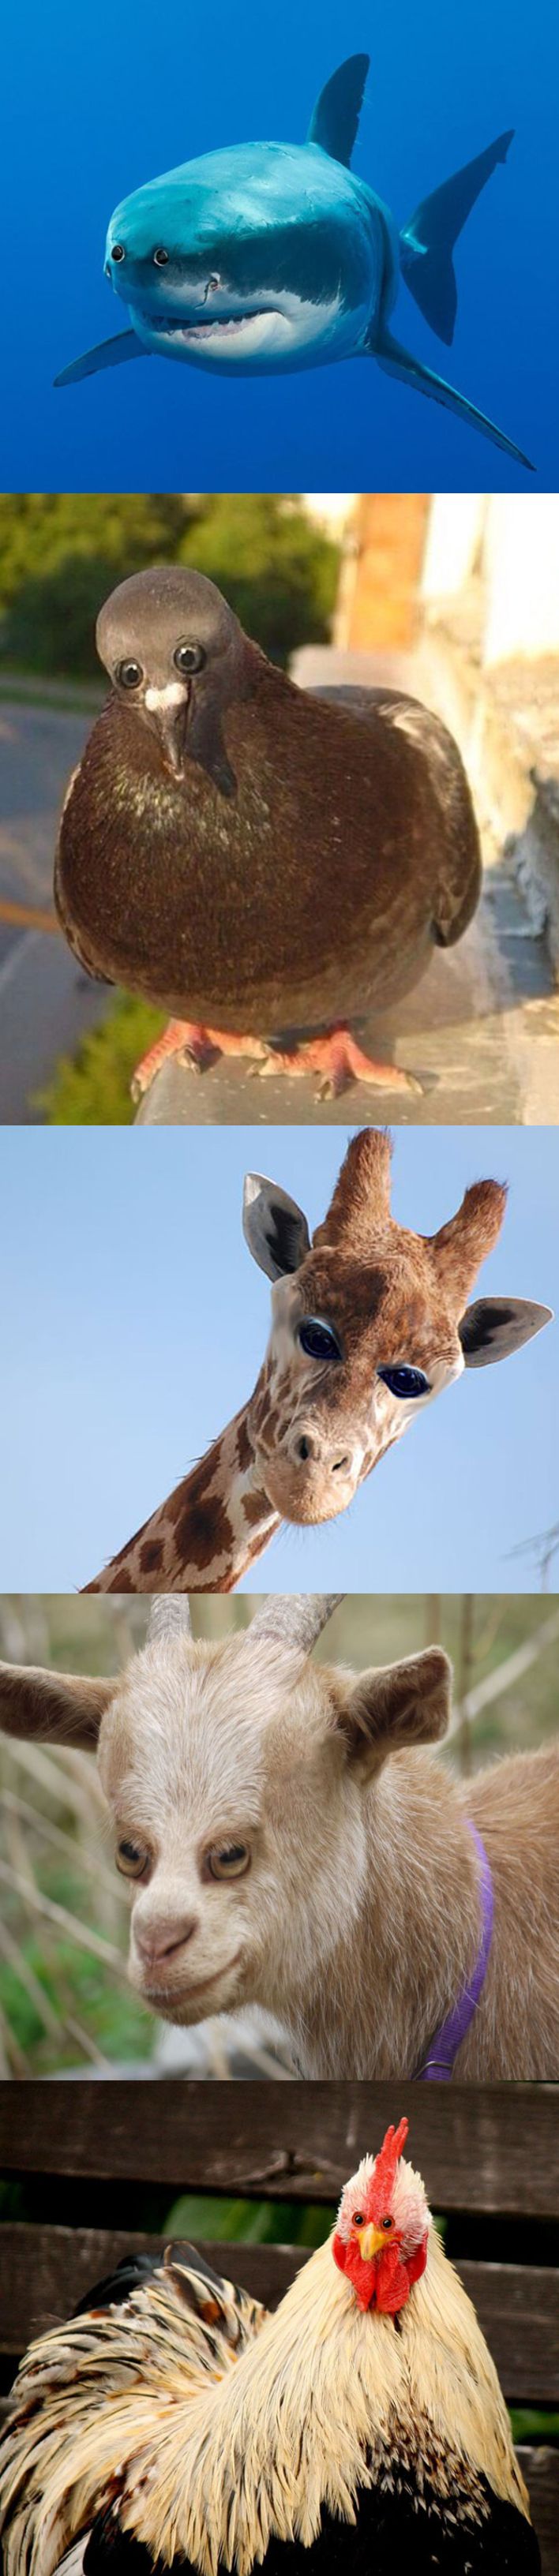 Introduced to the horrifying world of world of photoshopping animals with sideways-facing eyes to front-facing.